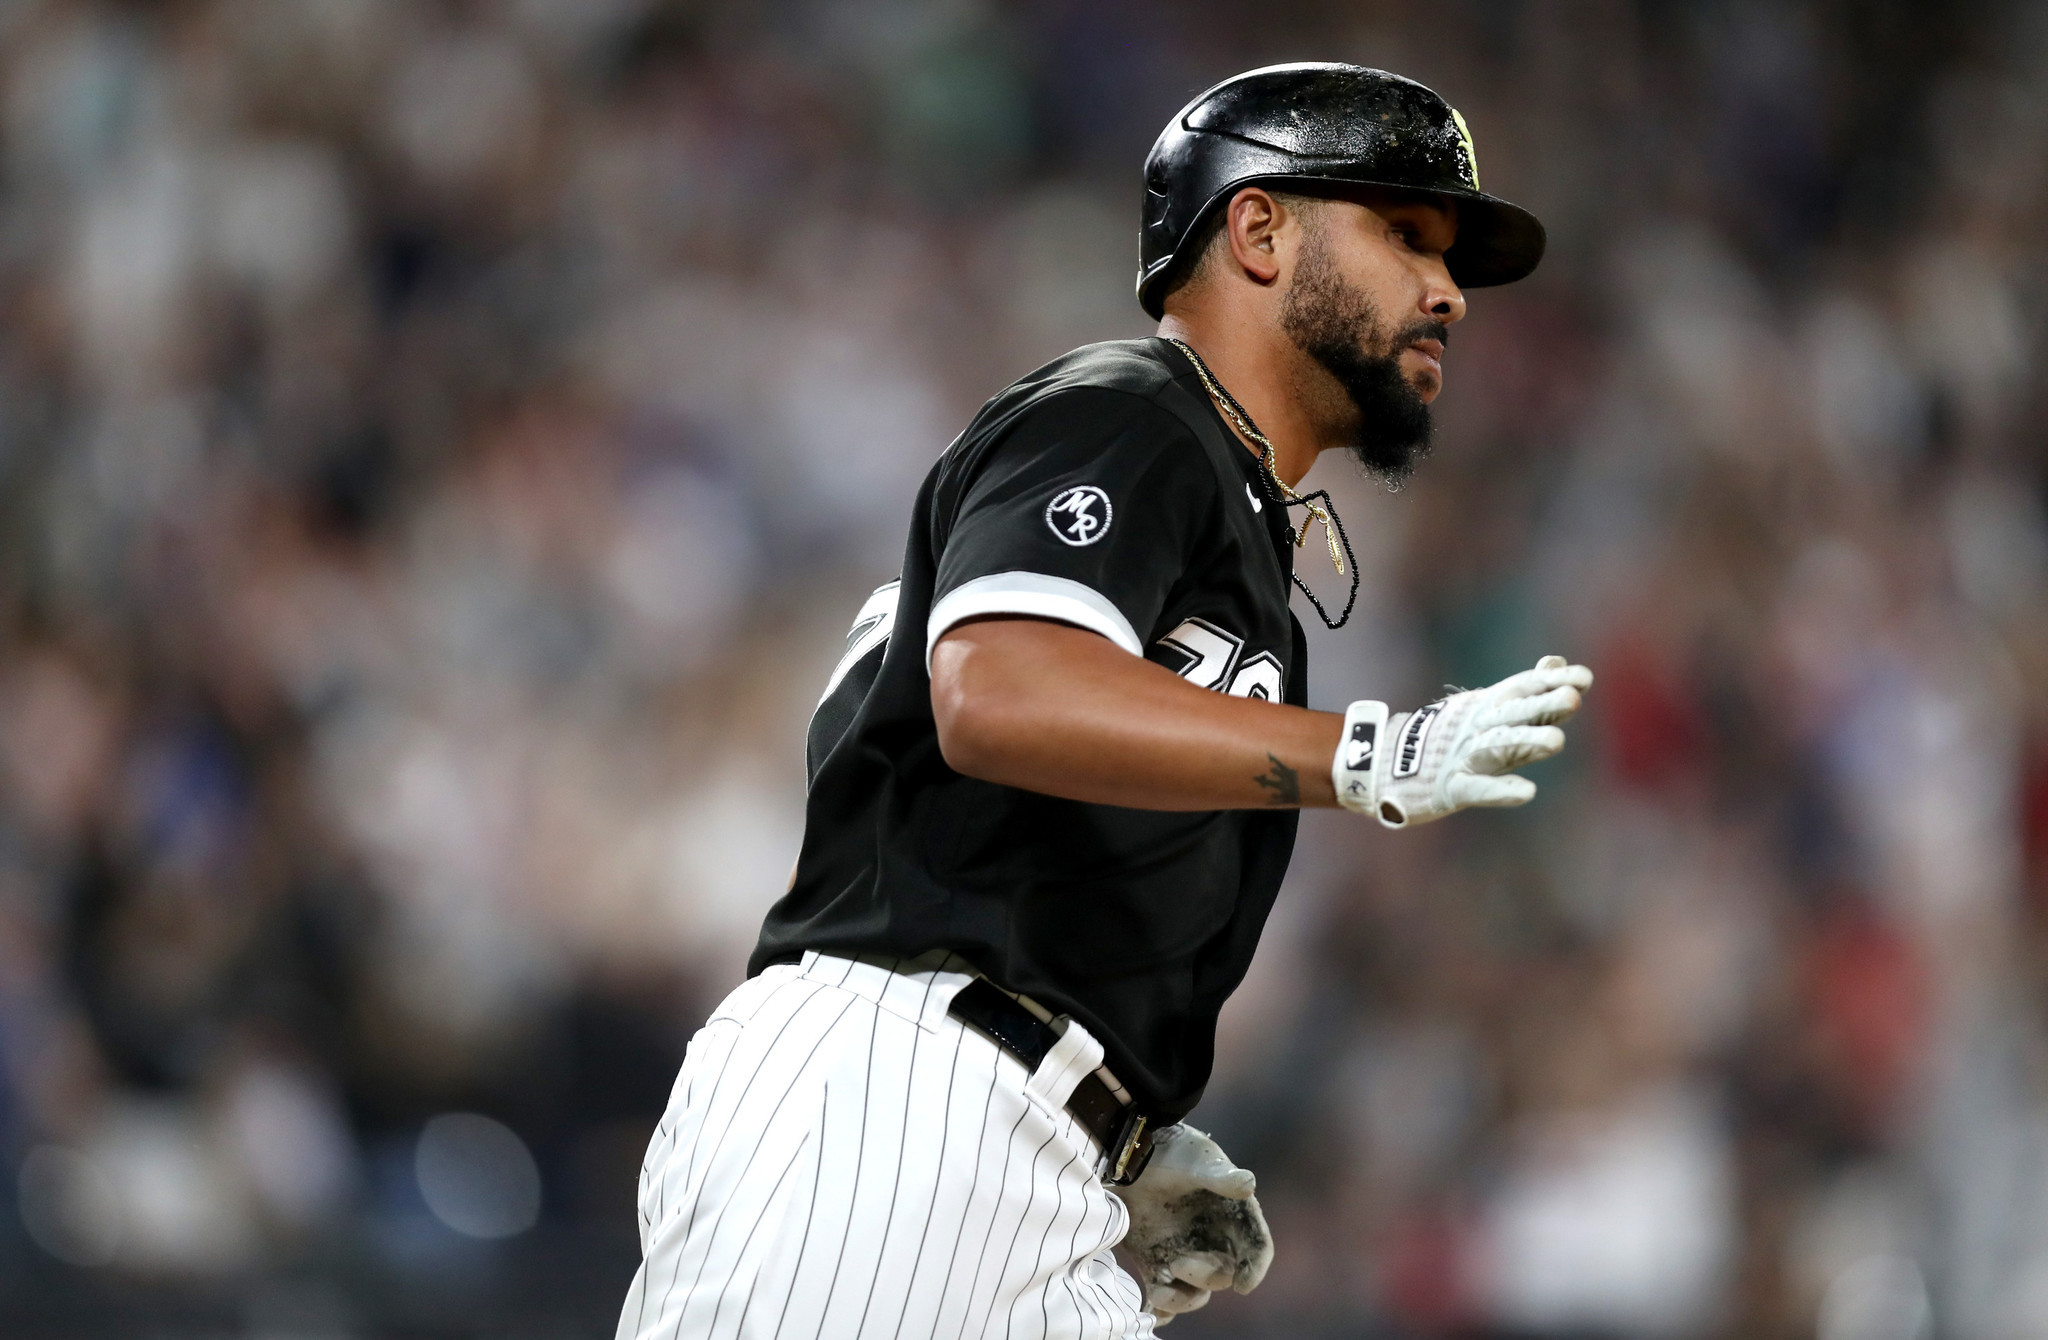 Jose Abreu is so much fun to have on the Chicago White Sox